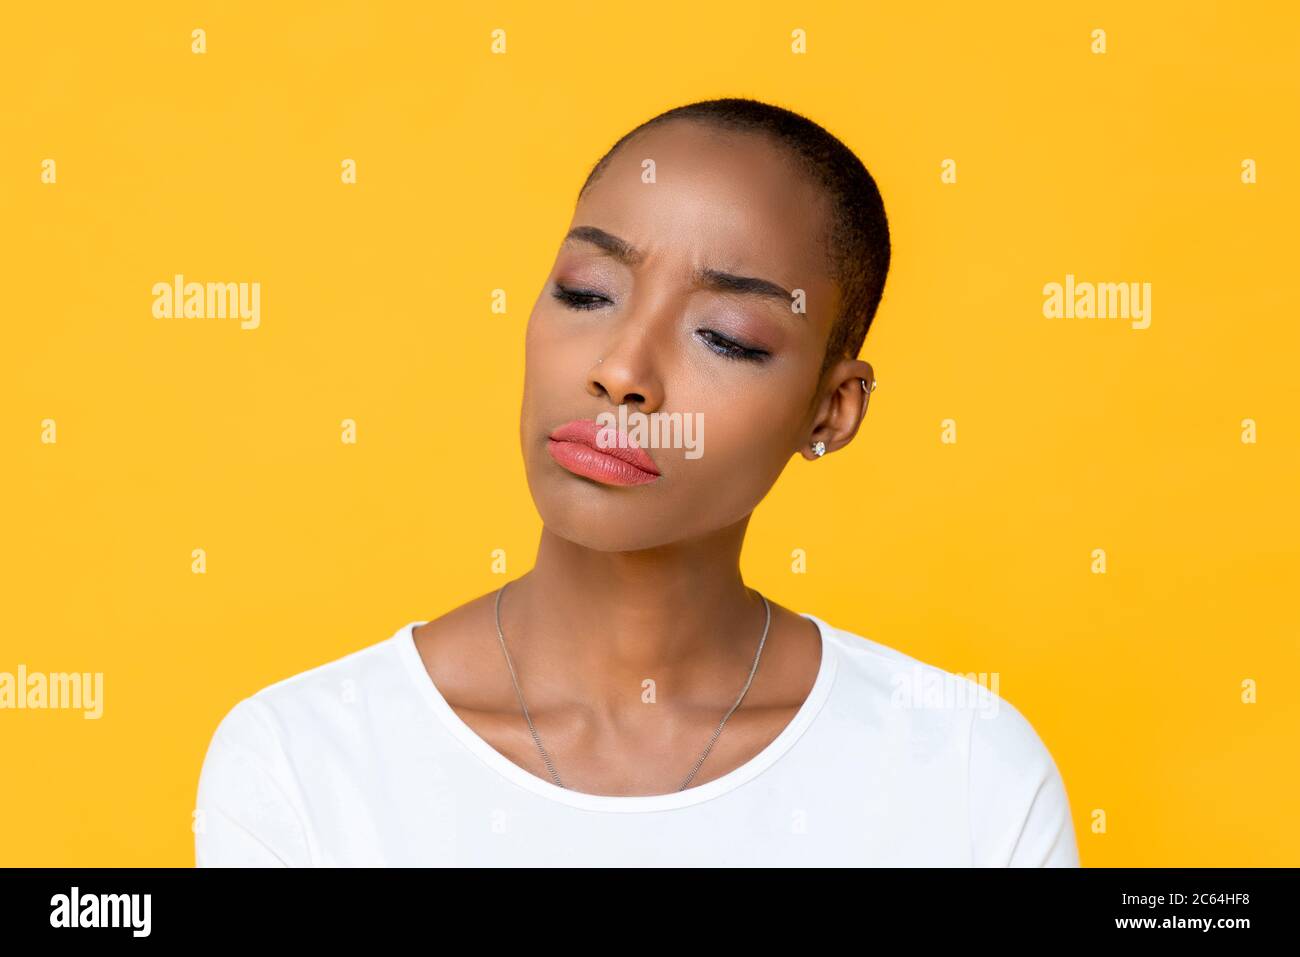 Close up portrait of unhappy young African American woman thinking looking bored and upset in isolated studio yellow background Stock Photo